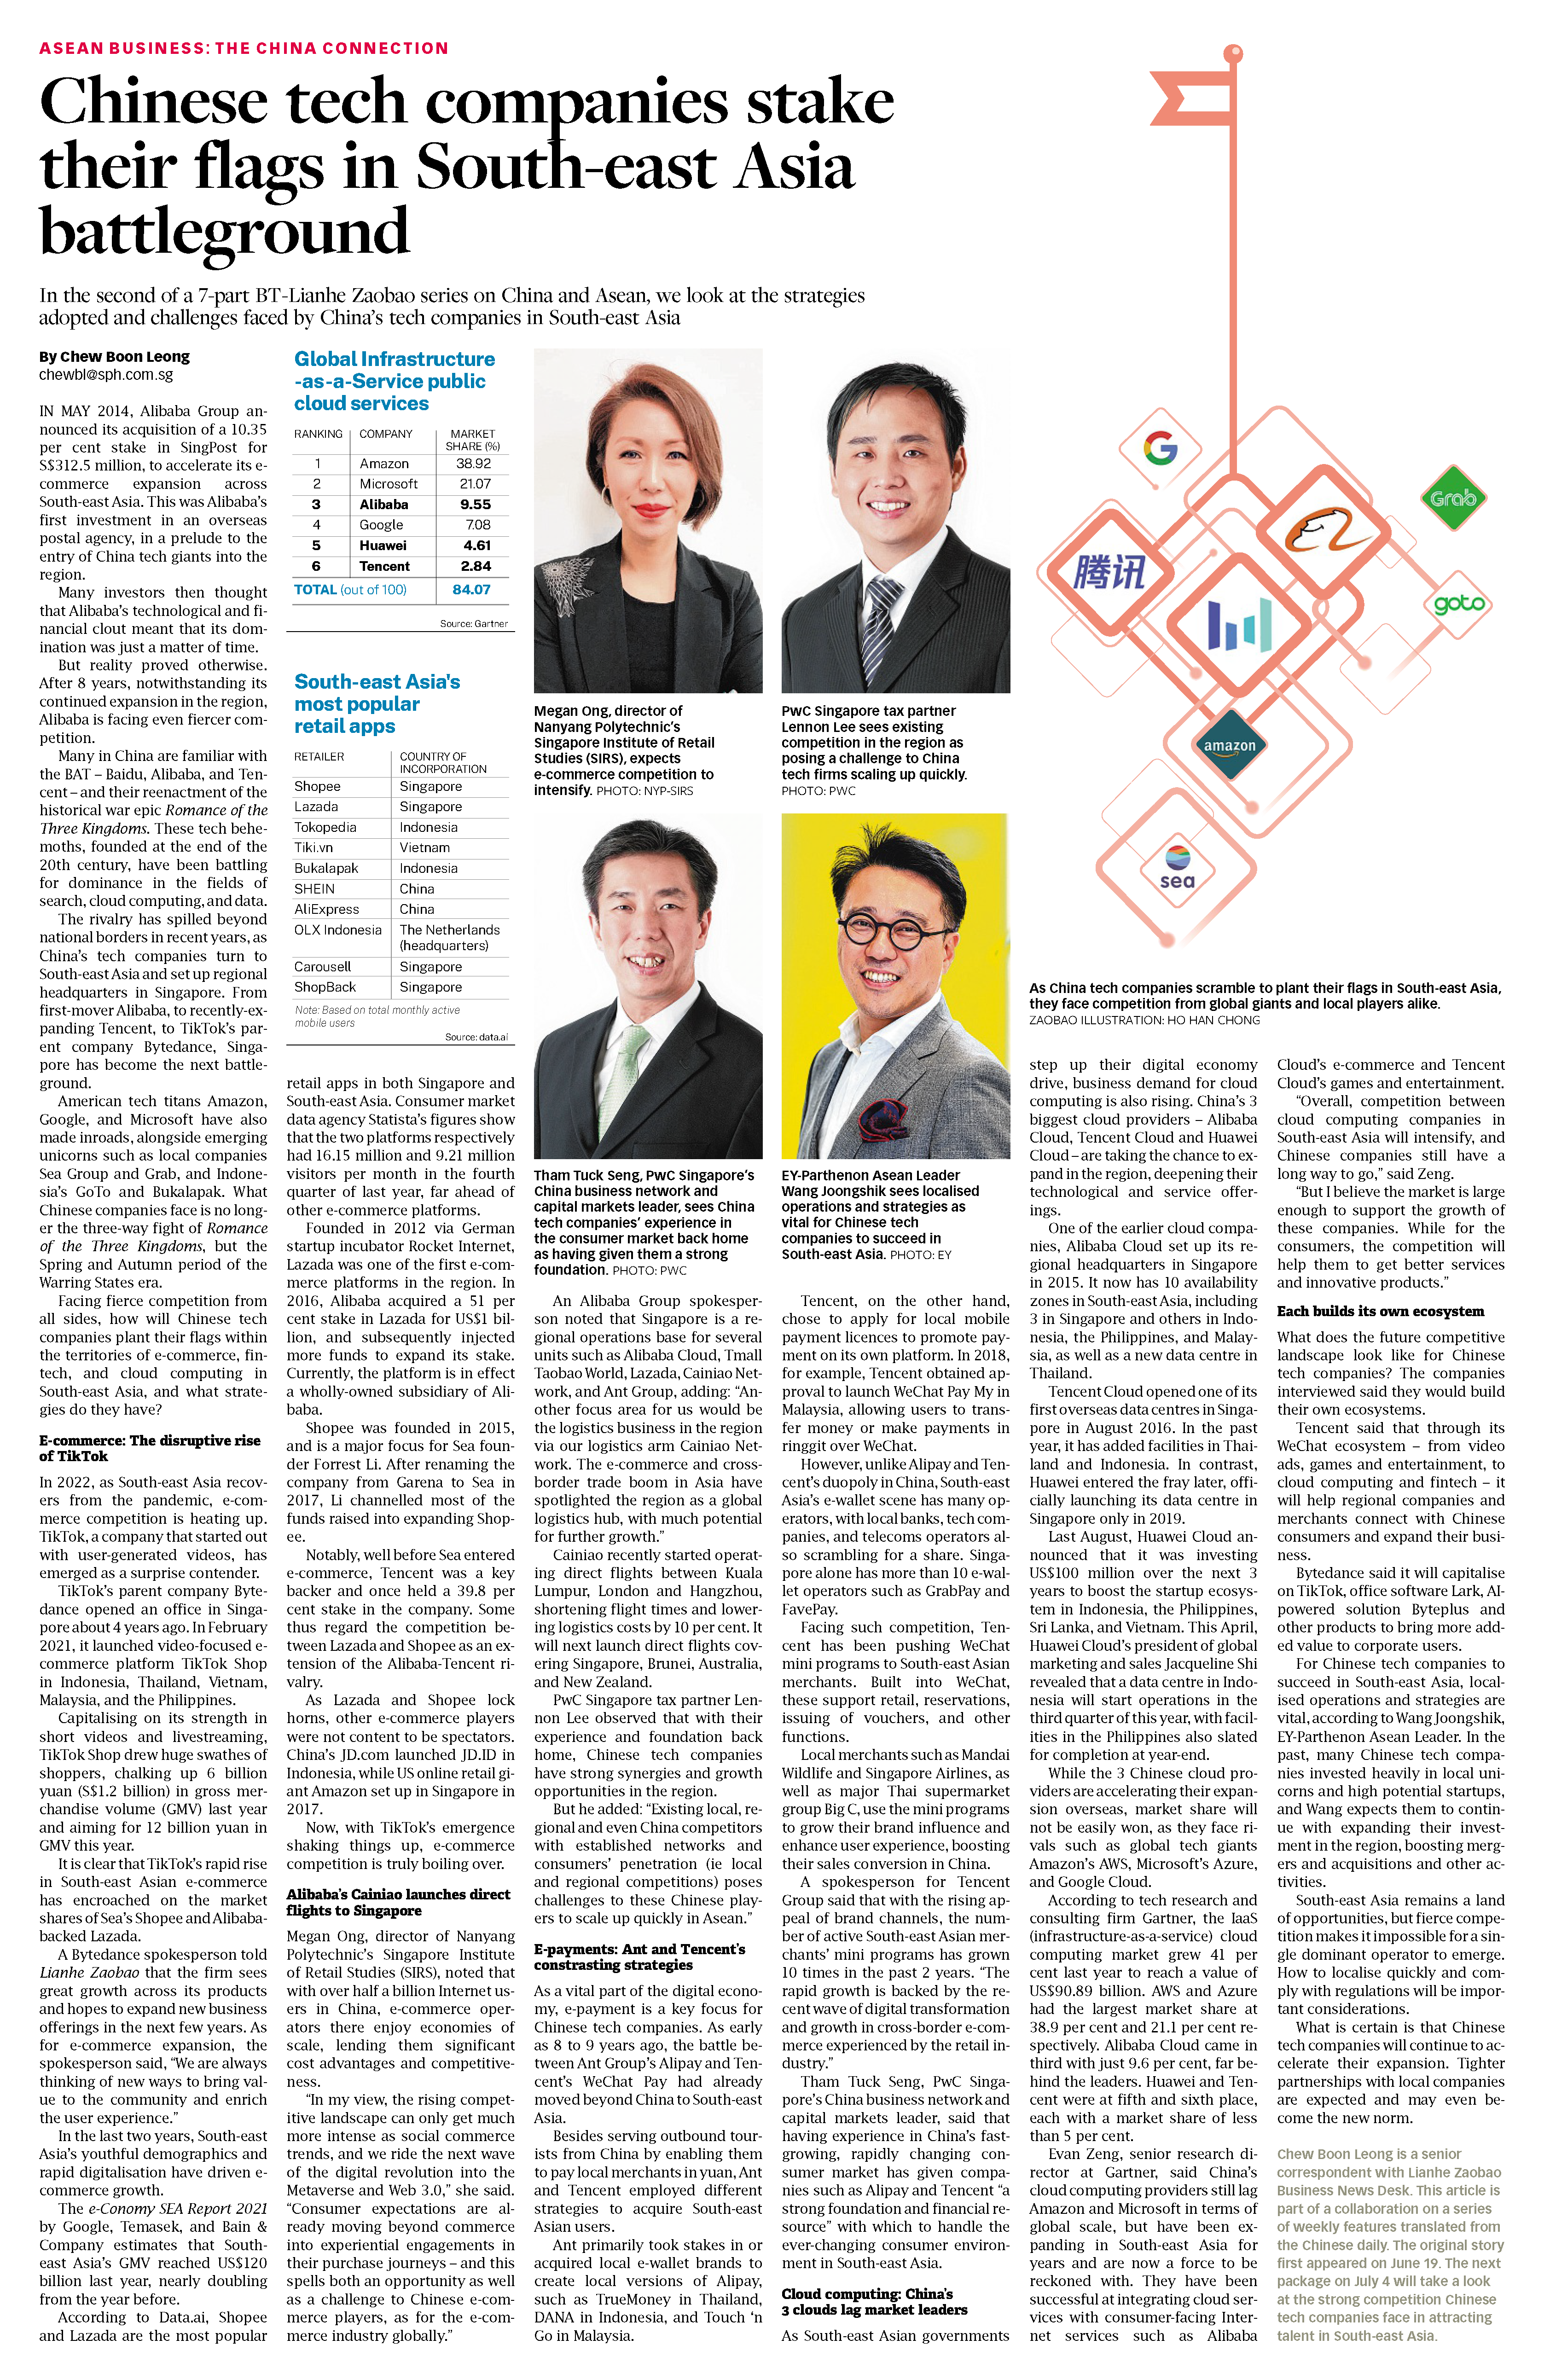 The Business Times Article - Chinese tech companies stake their flags in Southeast Asia battleground